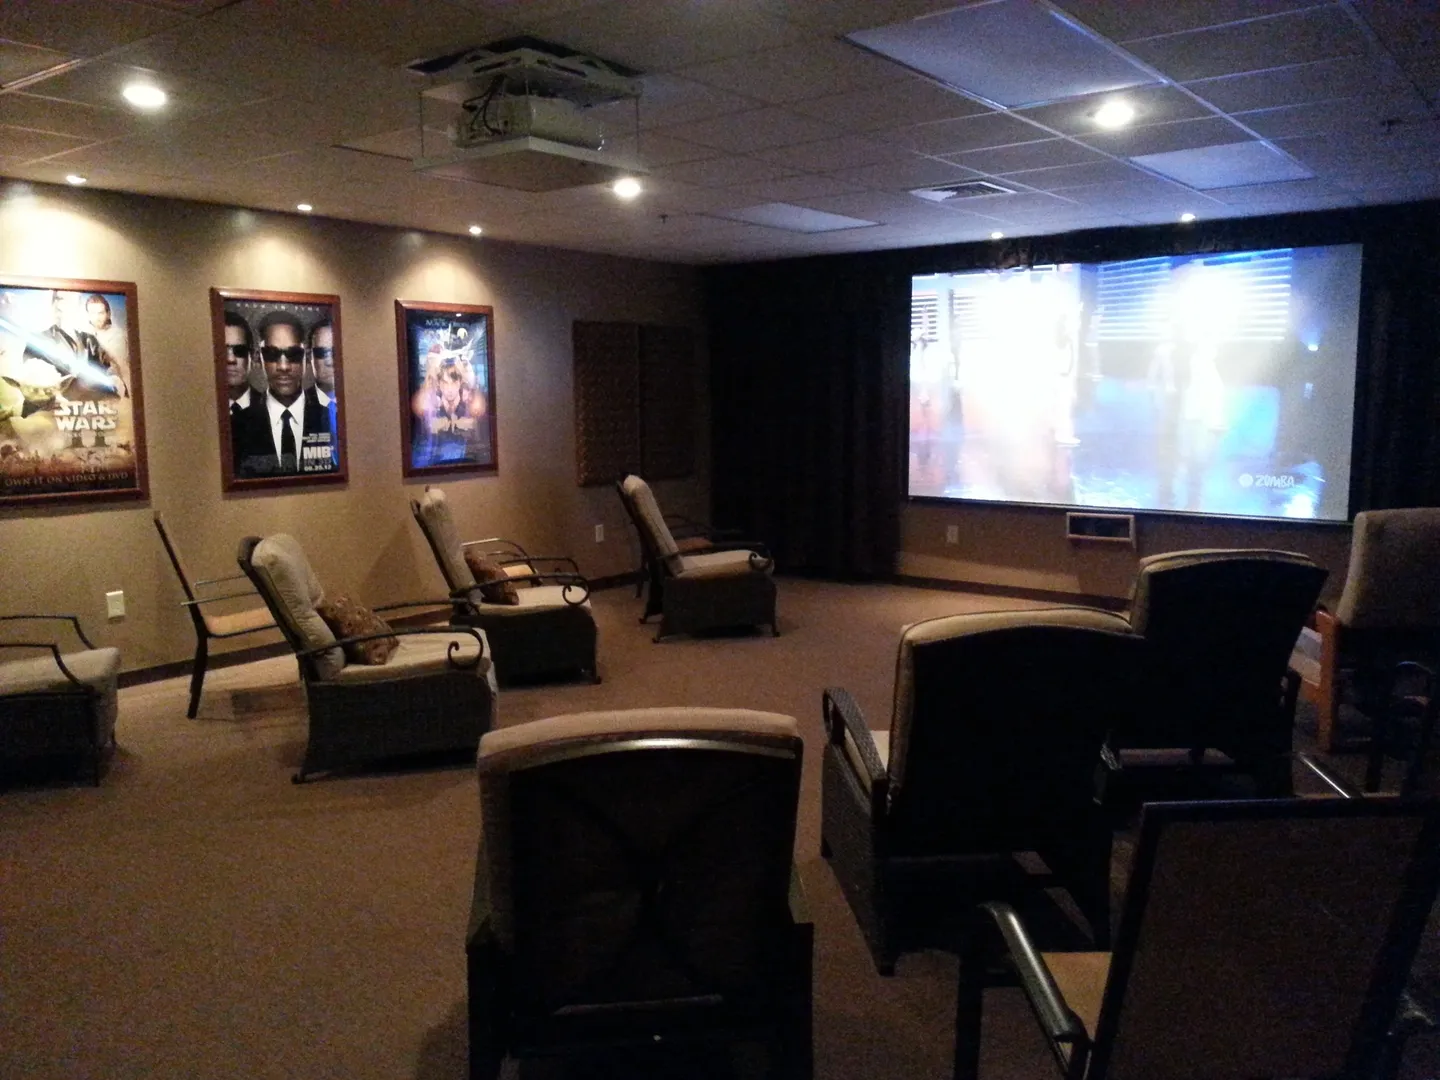 A room with several chairs and a projector screen.